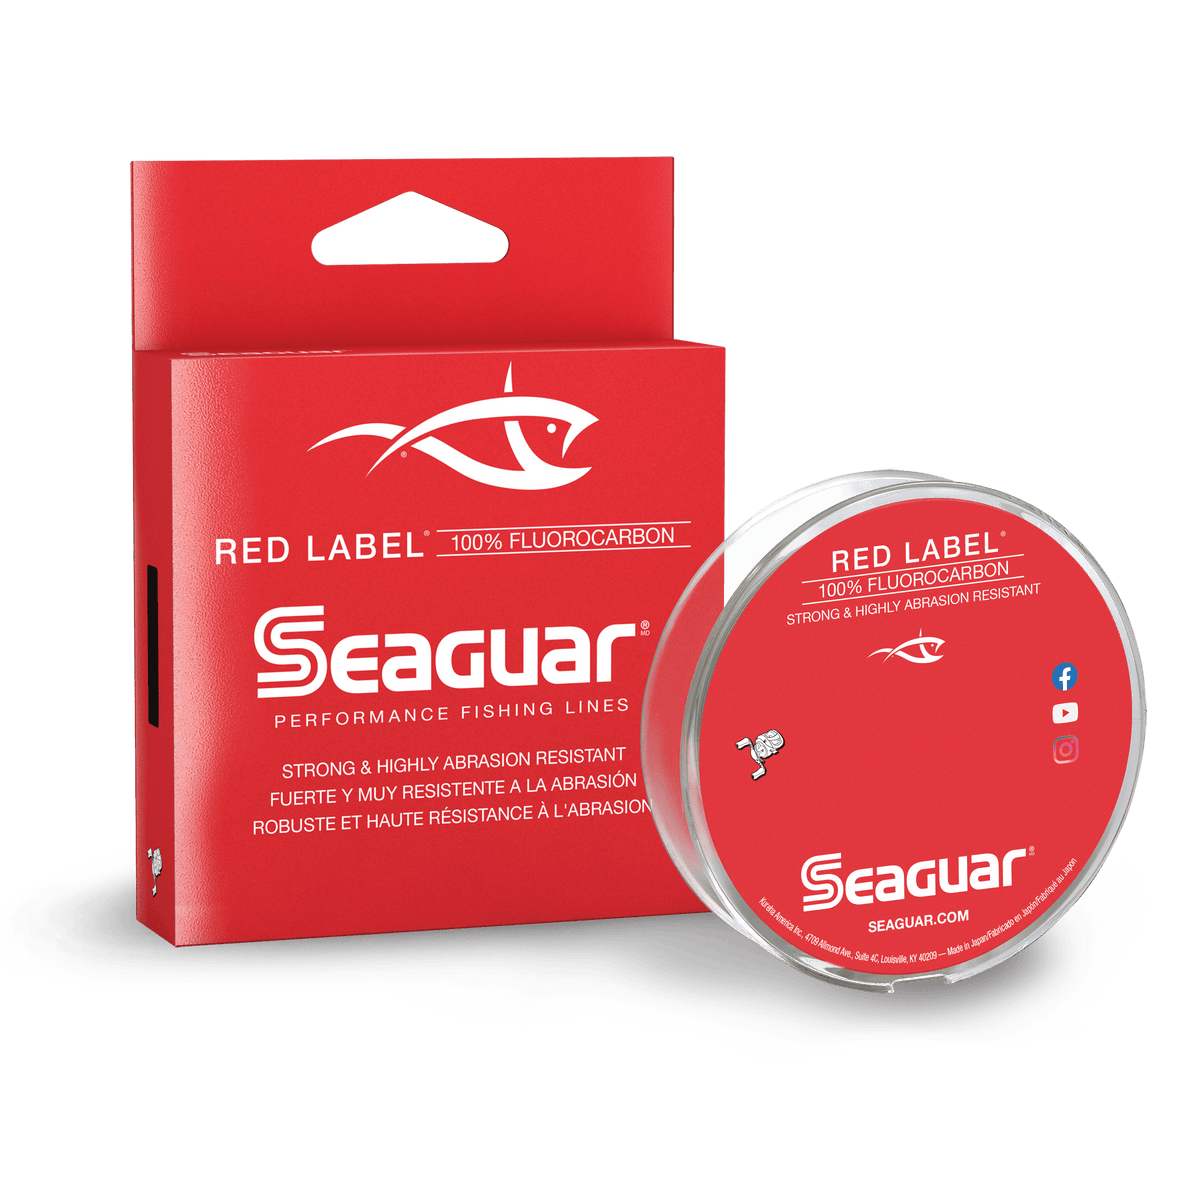 SEAGUAR Red LABELFLUOROCARBON Line 4LB-20LB Original Japan fishing line  183m 2023 New upgraded packaging - AliExpress